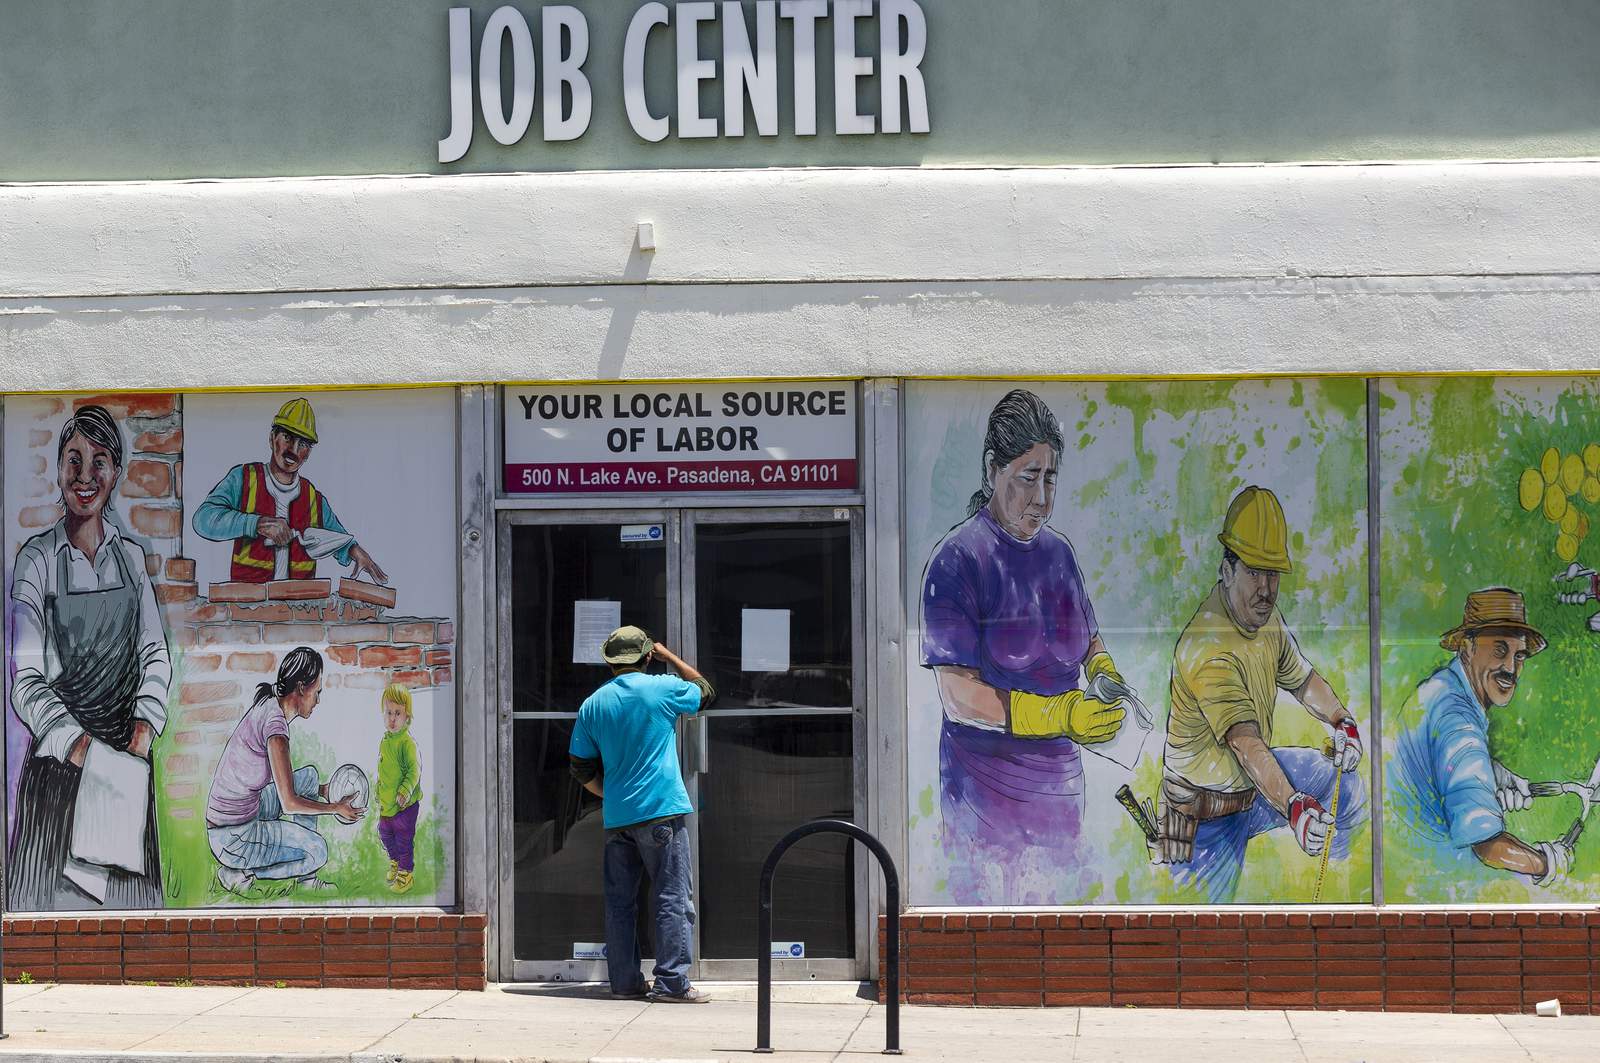 Many likely sought jobless aid after federal benefit lapses